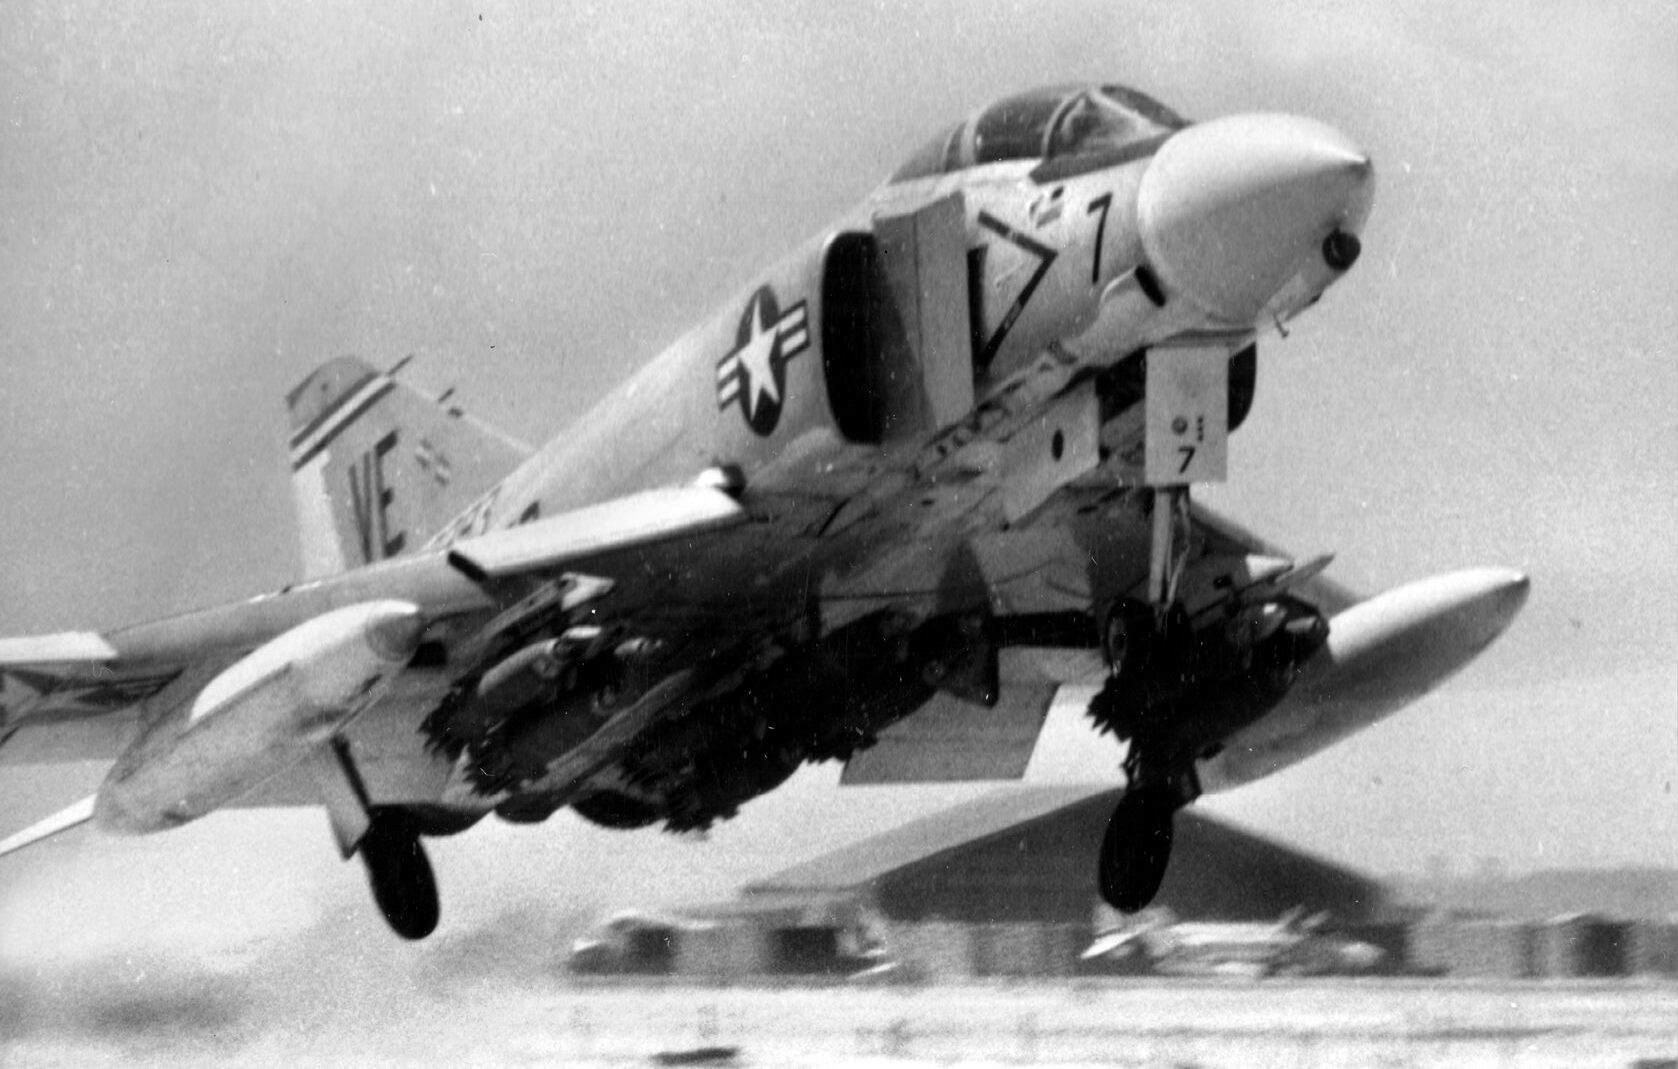 An F-4 Phantom takes off on a ground support mission in May 1967. When Marine reconnaissance patrols made contact with the enemy south of the DMZ, they relied heavily on organic tactical air support.